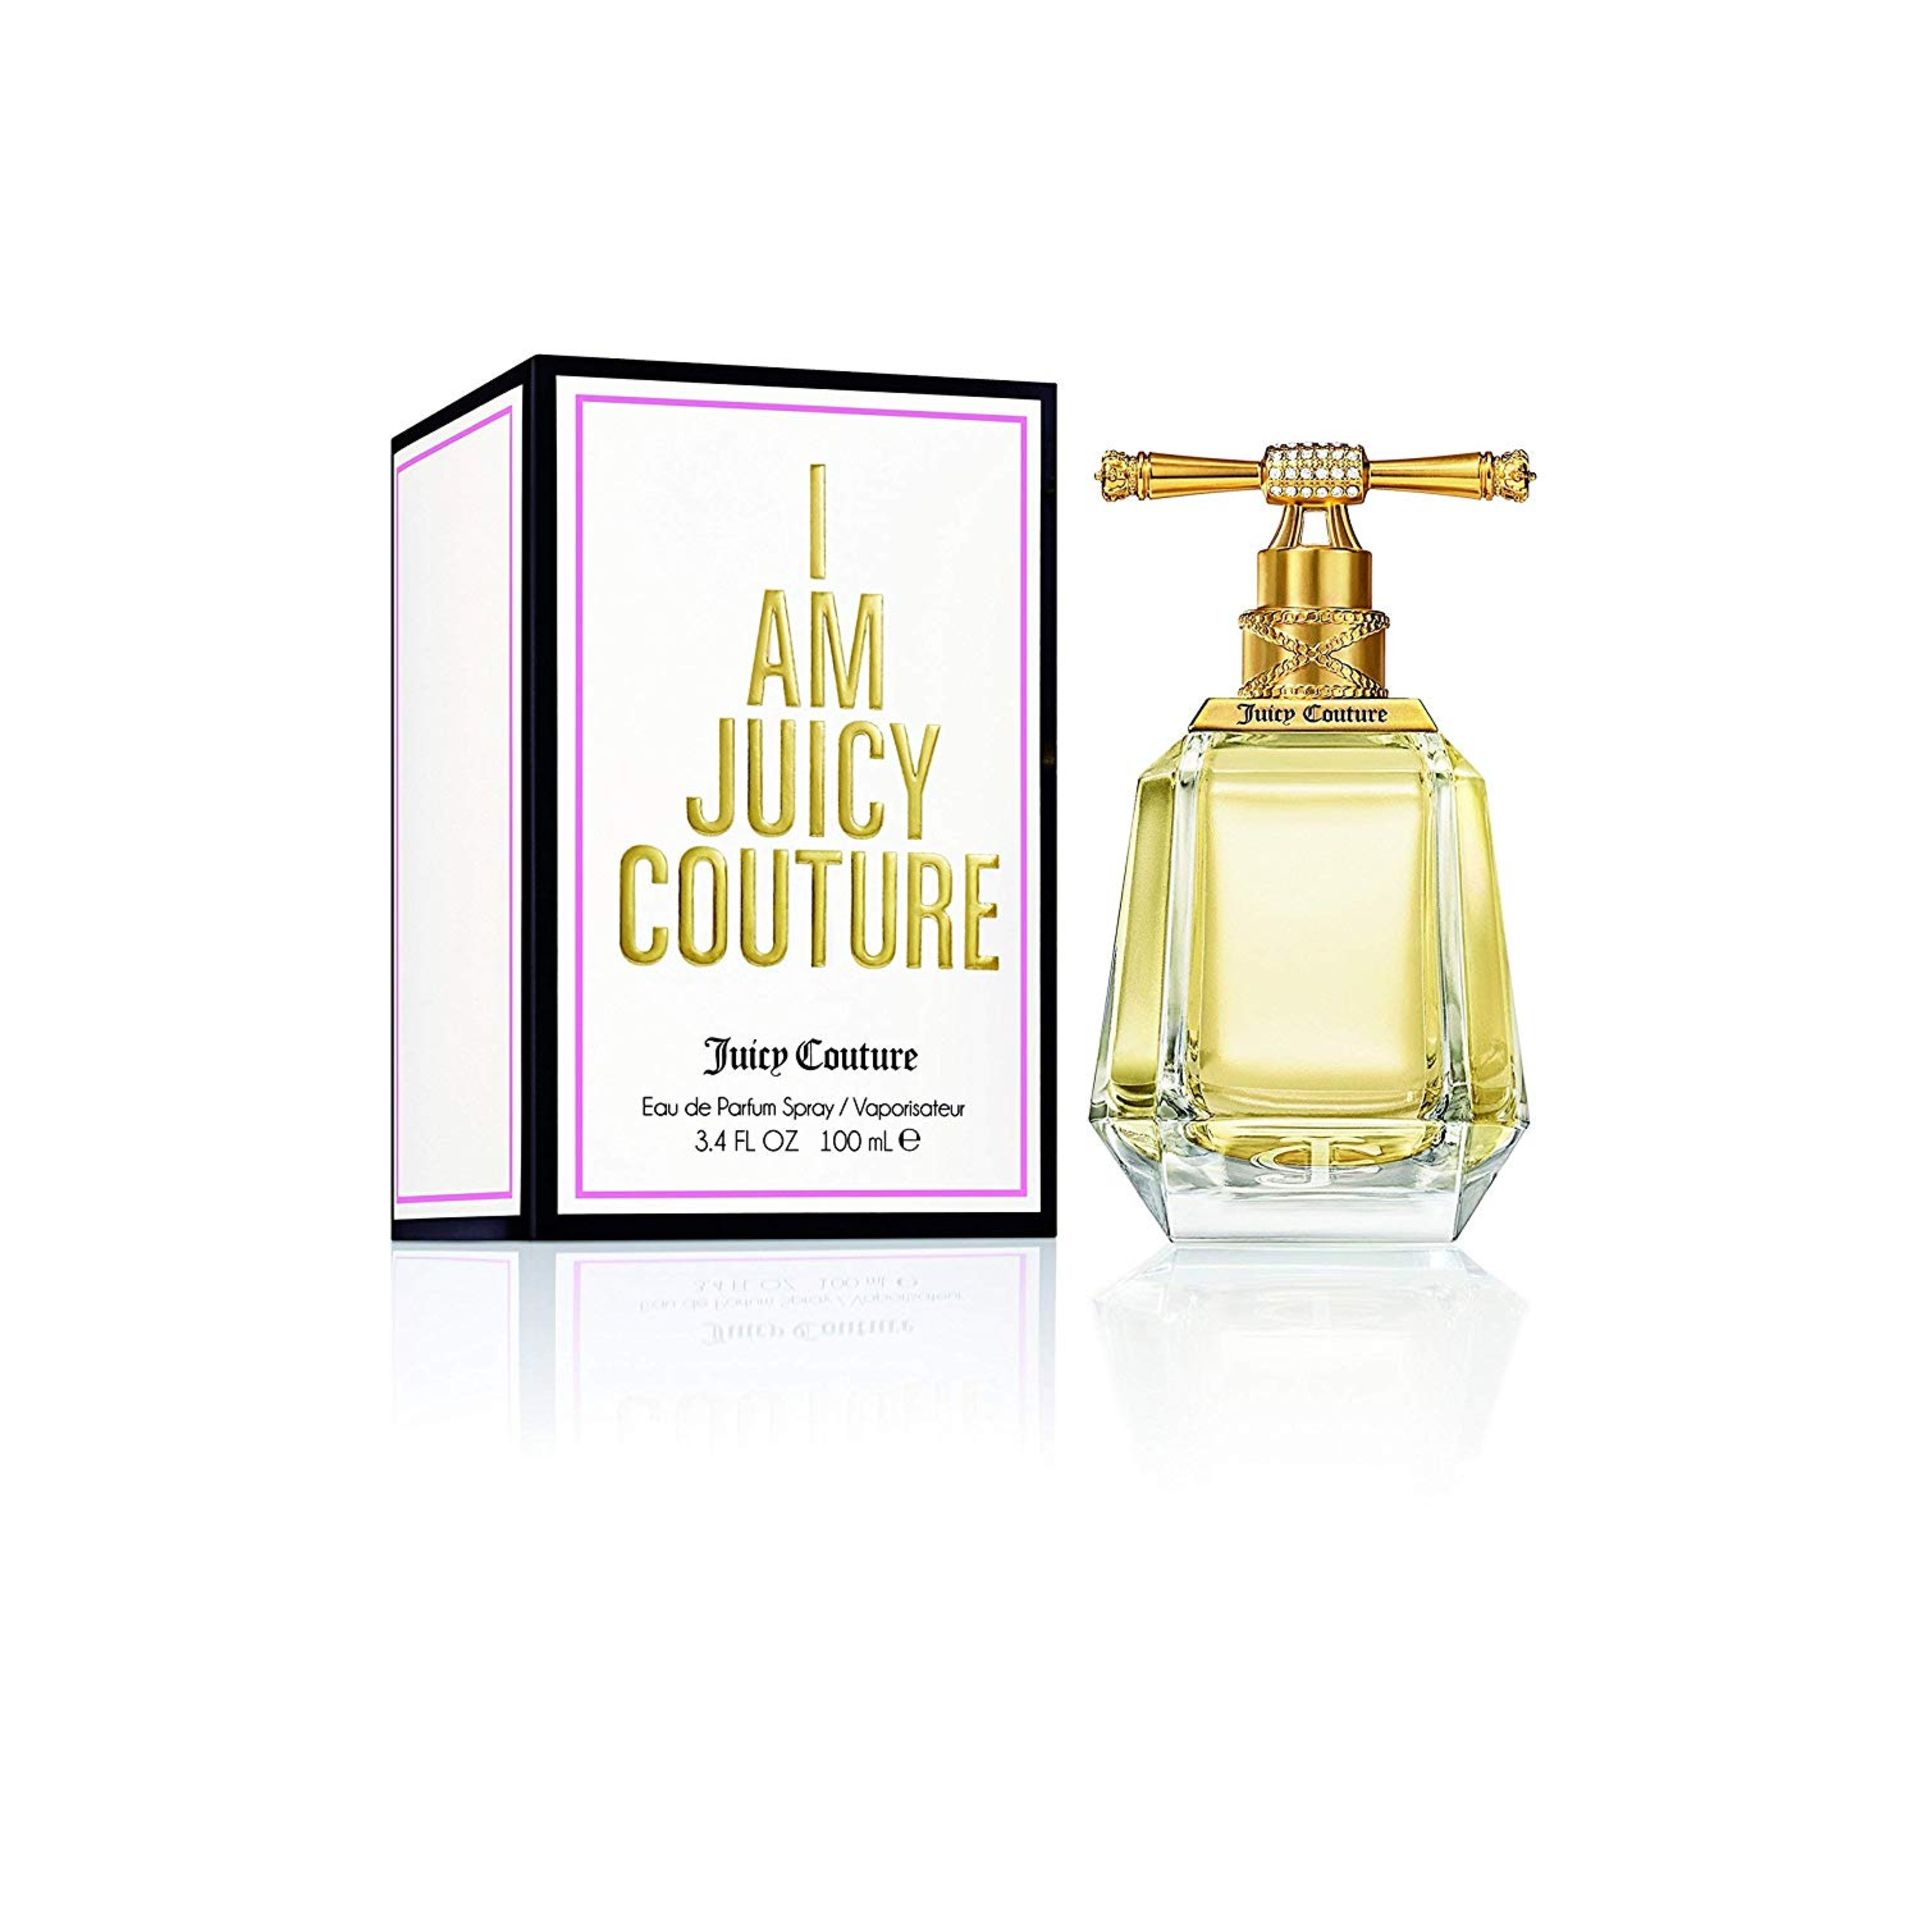 V Brand New Juicy Couture I Am Juicy Couture 100ml EDP Spray